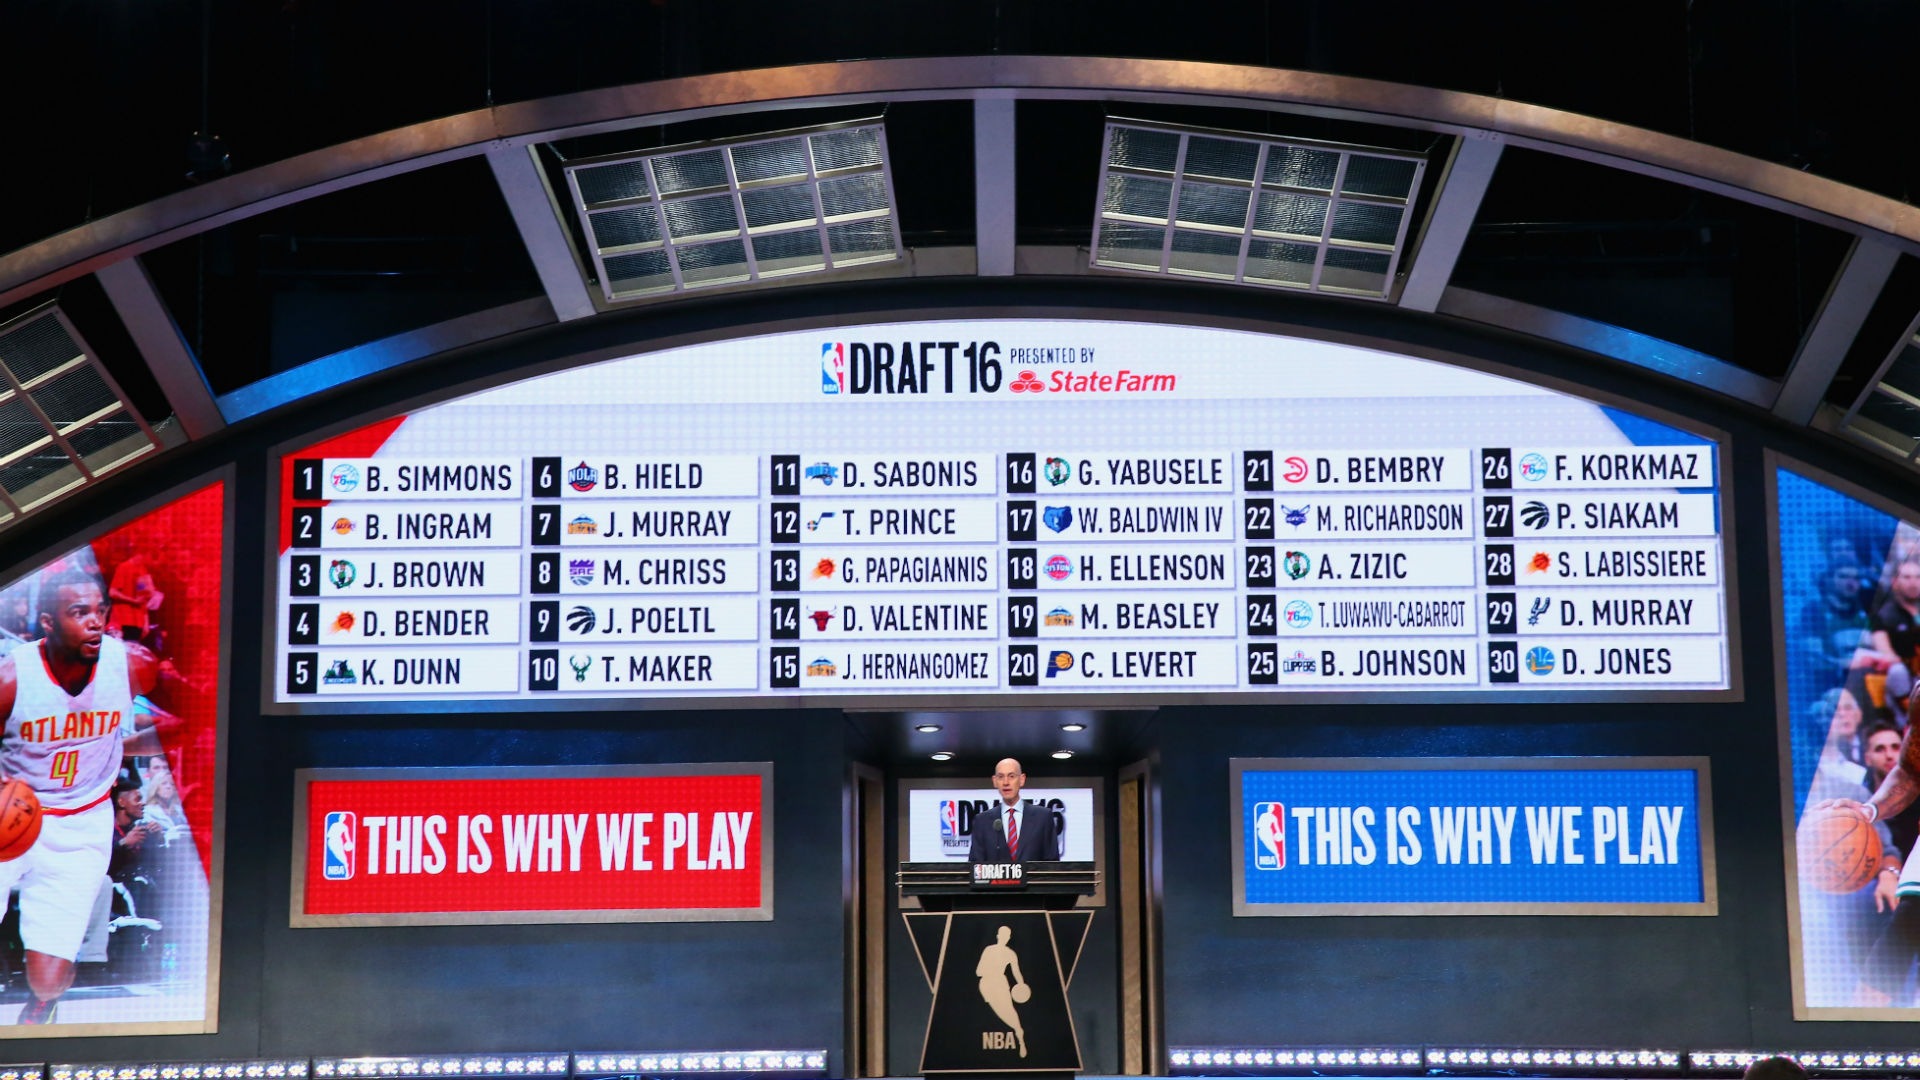 NBA Draft lottery 2017: Full results, pick order for first 